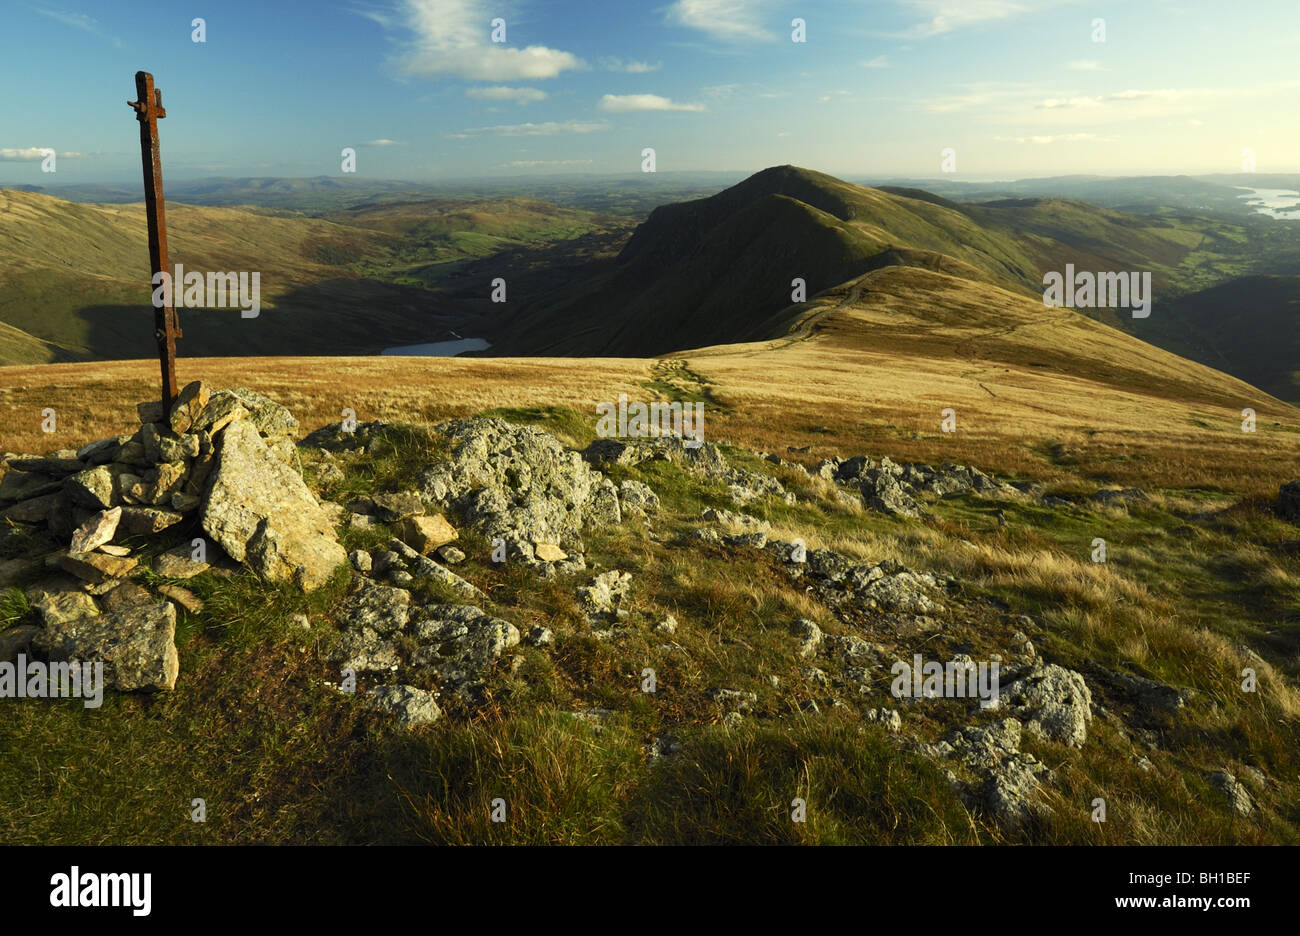 Cumbrian hill top 'High Street' in the English lakes region with views down to Thornthwaite Crag, Kentmere  and Troutbeck Stock Photo